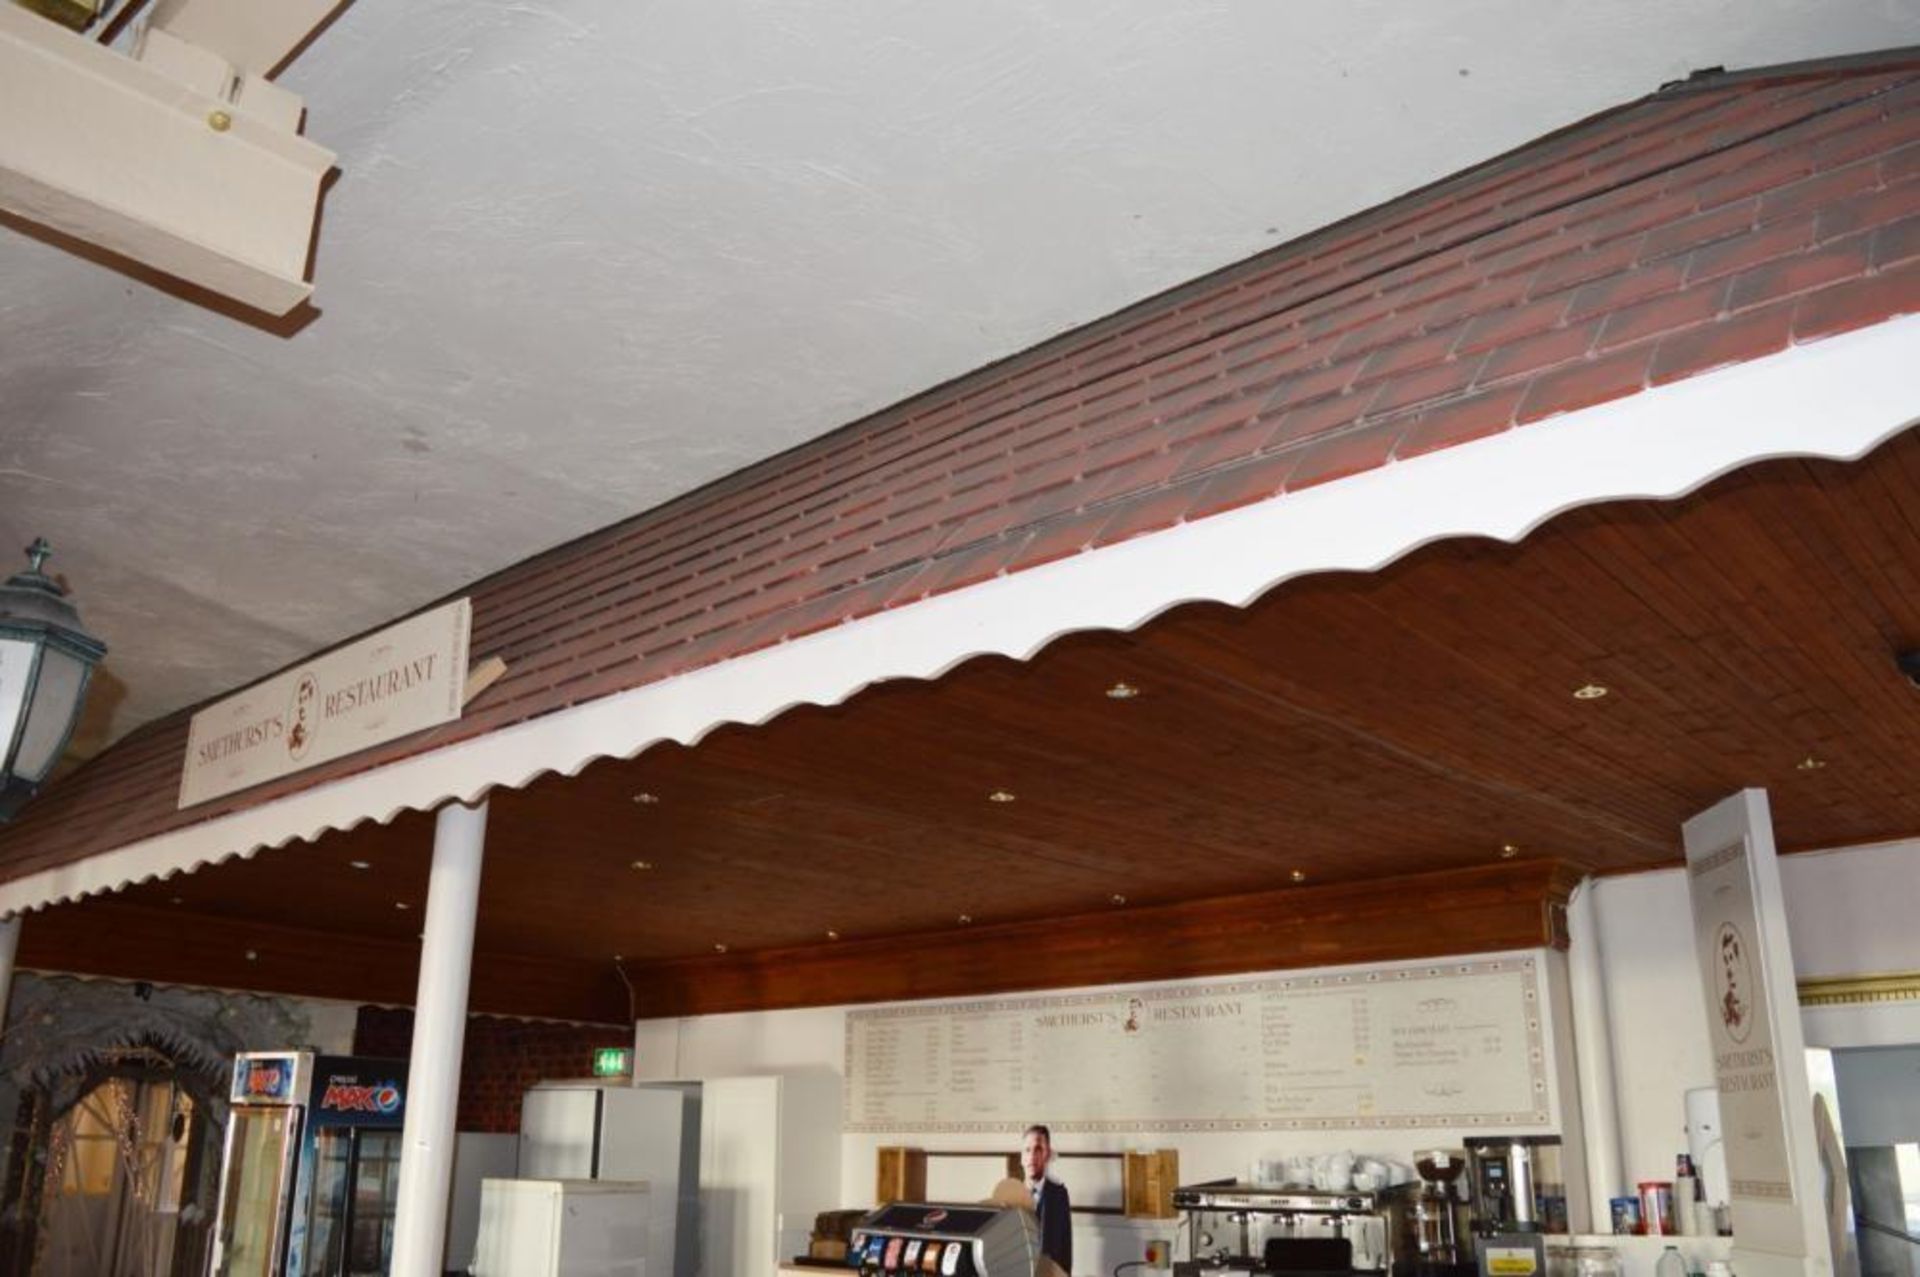 1 x Smethursts Restaurant Overhead Canopy With Ornate Pillars and Downlights - H370 x W980 x D500/28 - Image 8 of 11